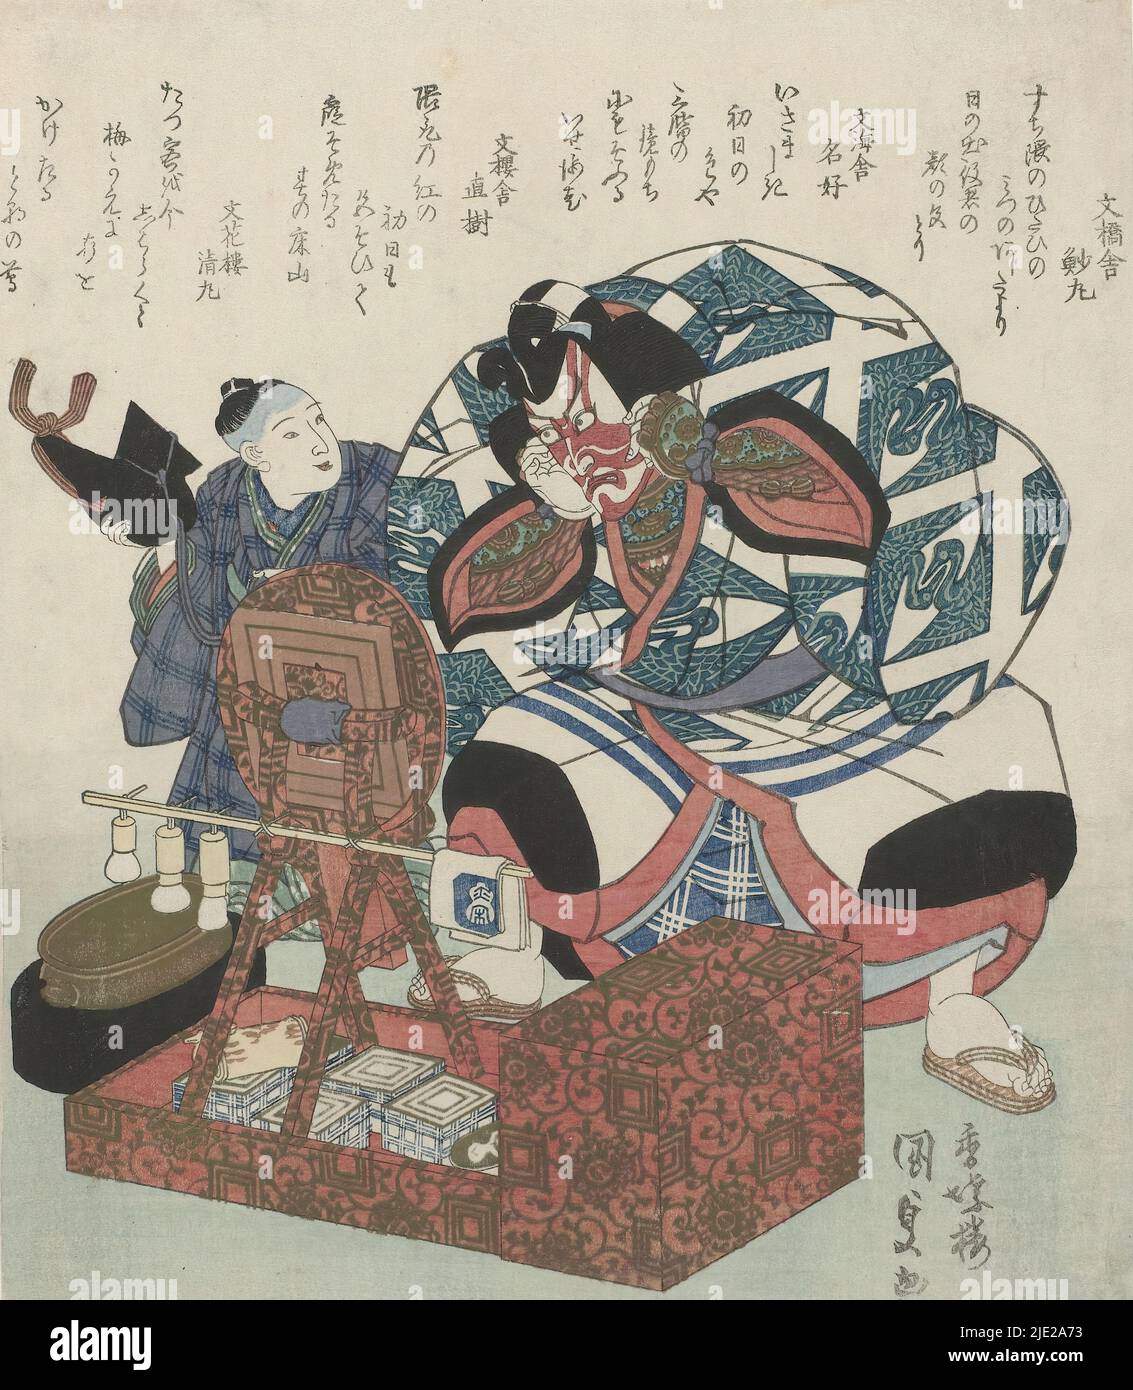 The actor Ichikawa Danjuro VII prepares for a Shibaraku performance assisted by a boy, The actor Ichikawa Danjuro VII stands in front of a mirror and puts on a mask, while a boy (presumably his son, the future Danjuro VIII) stands beside him and holds his headgear., print maker: Utagawa Kunisada (I), (mentioned on object), Edo, c. 1830, paper, height 218 mm × width 188 mm Stock Photo